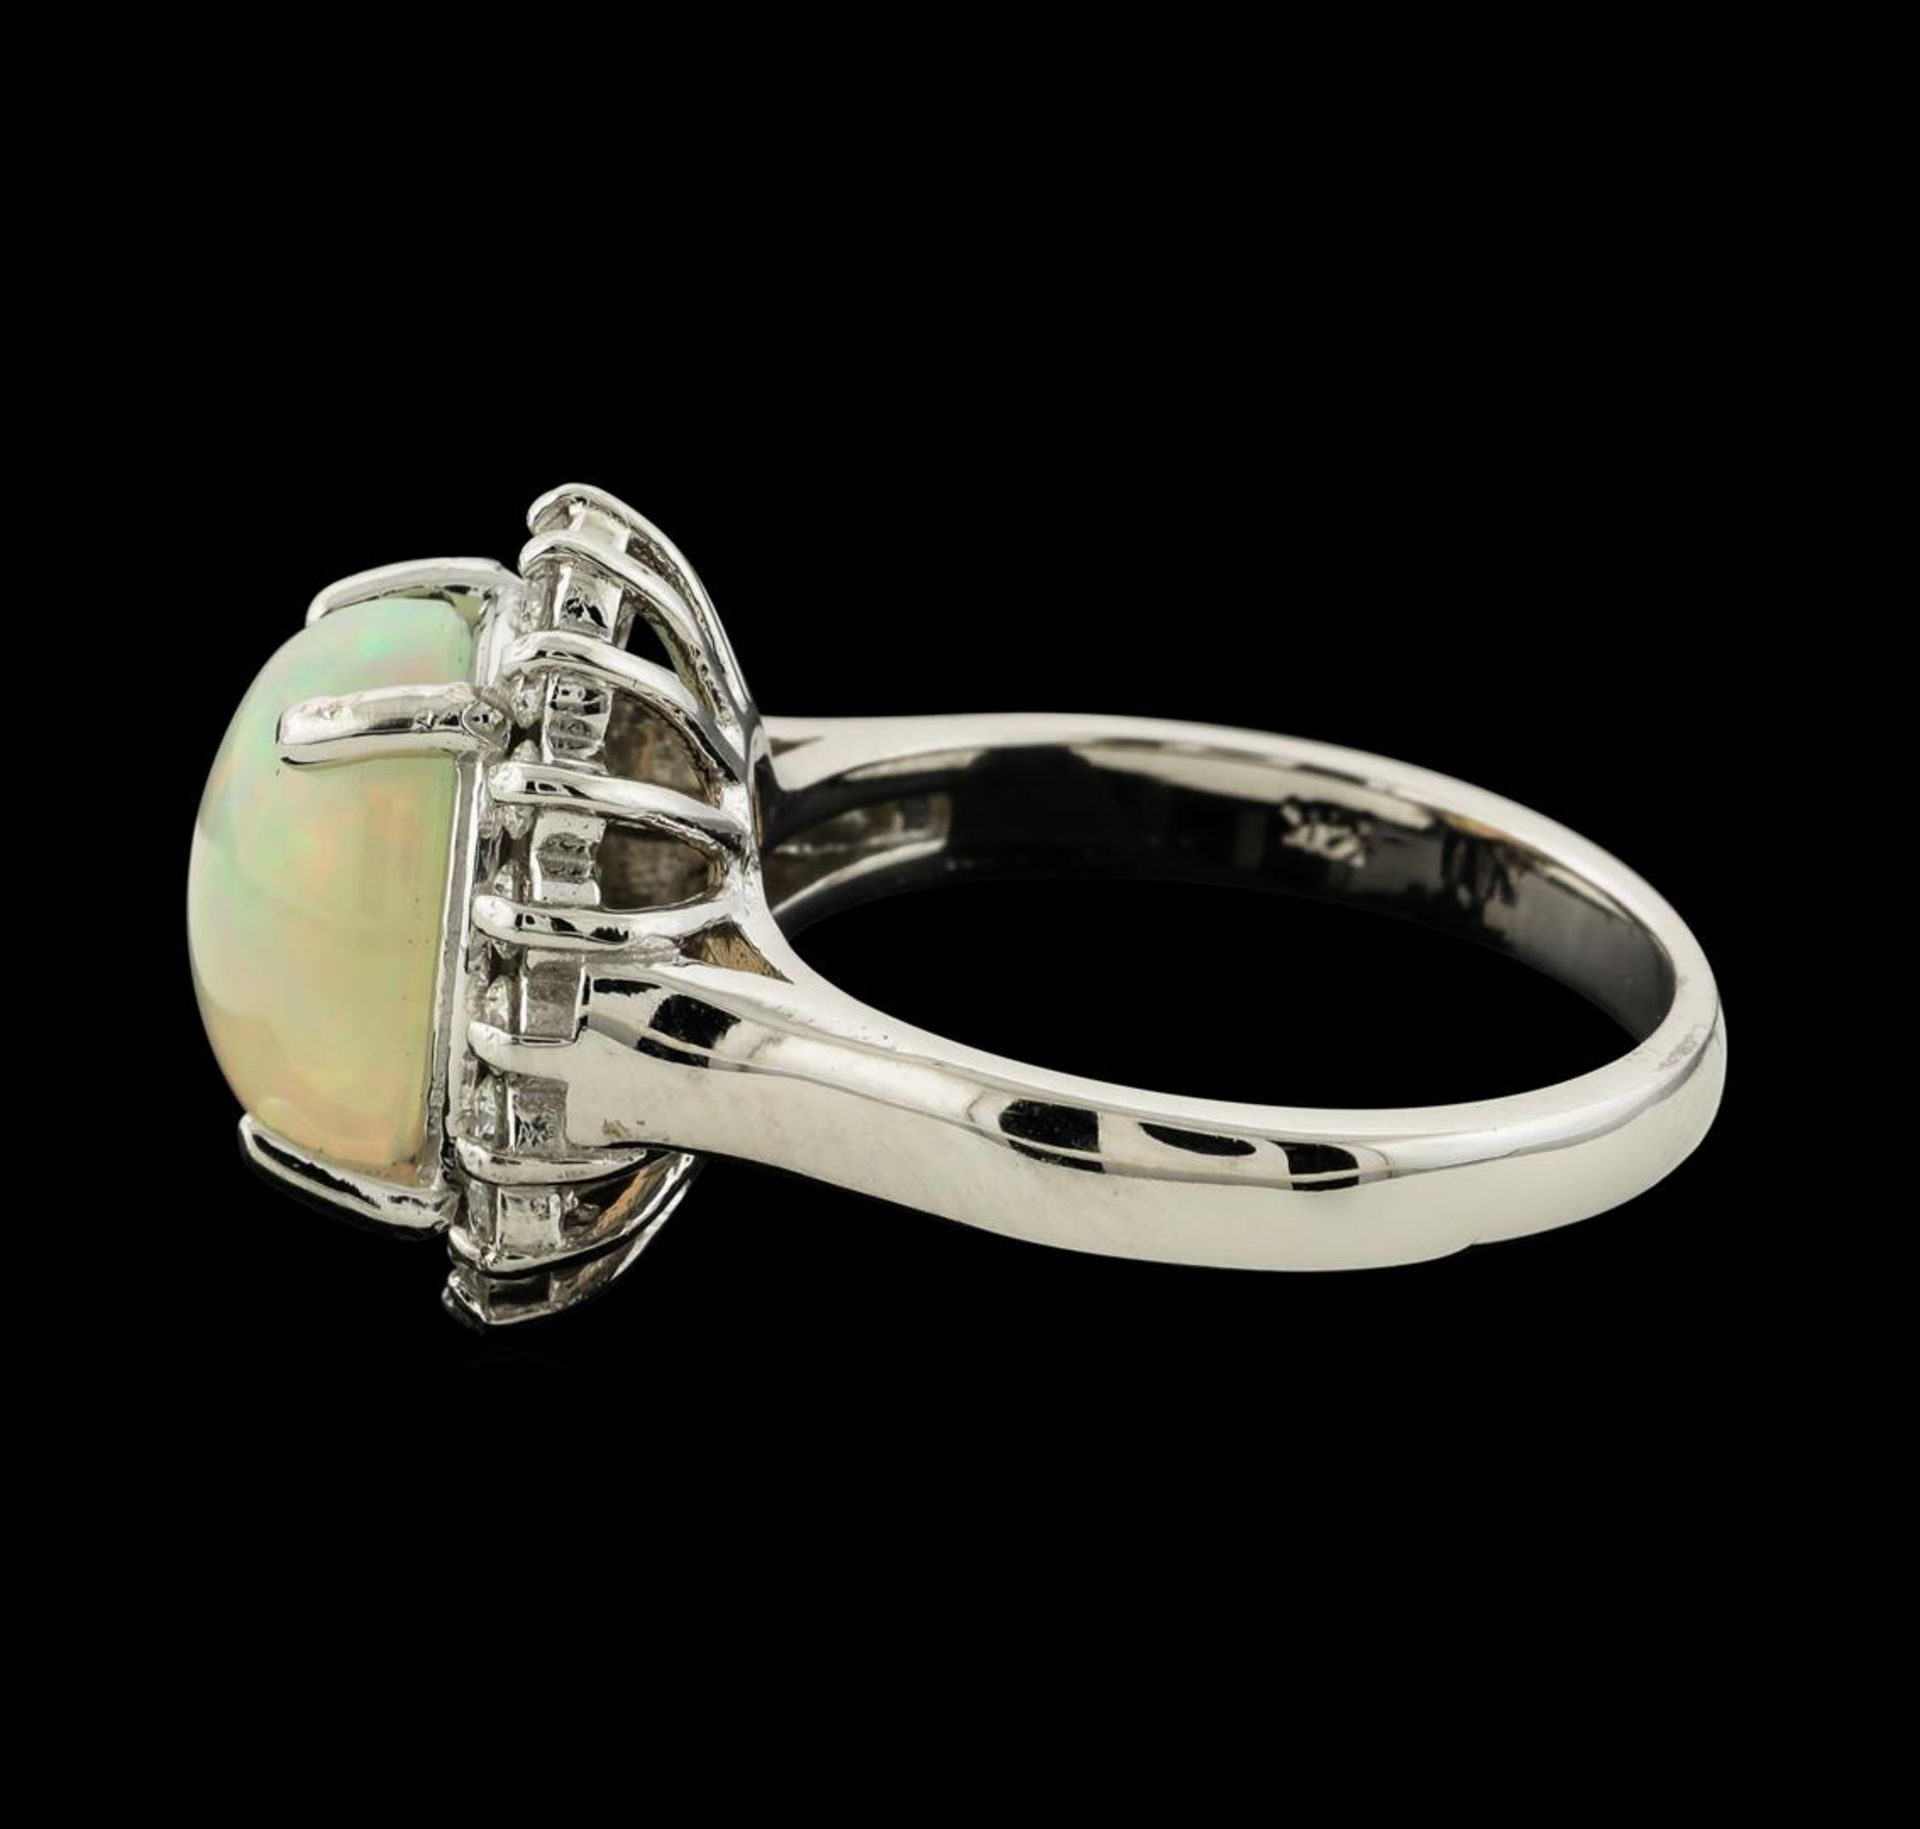 2.66 ctw Opal and Diamond Ring - 14KT White Gold - Image 3 of 4